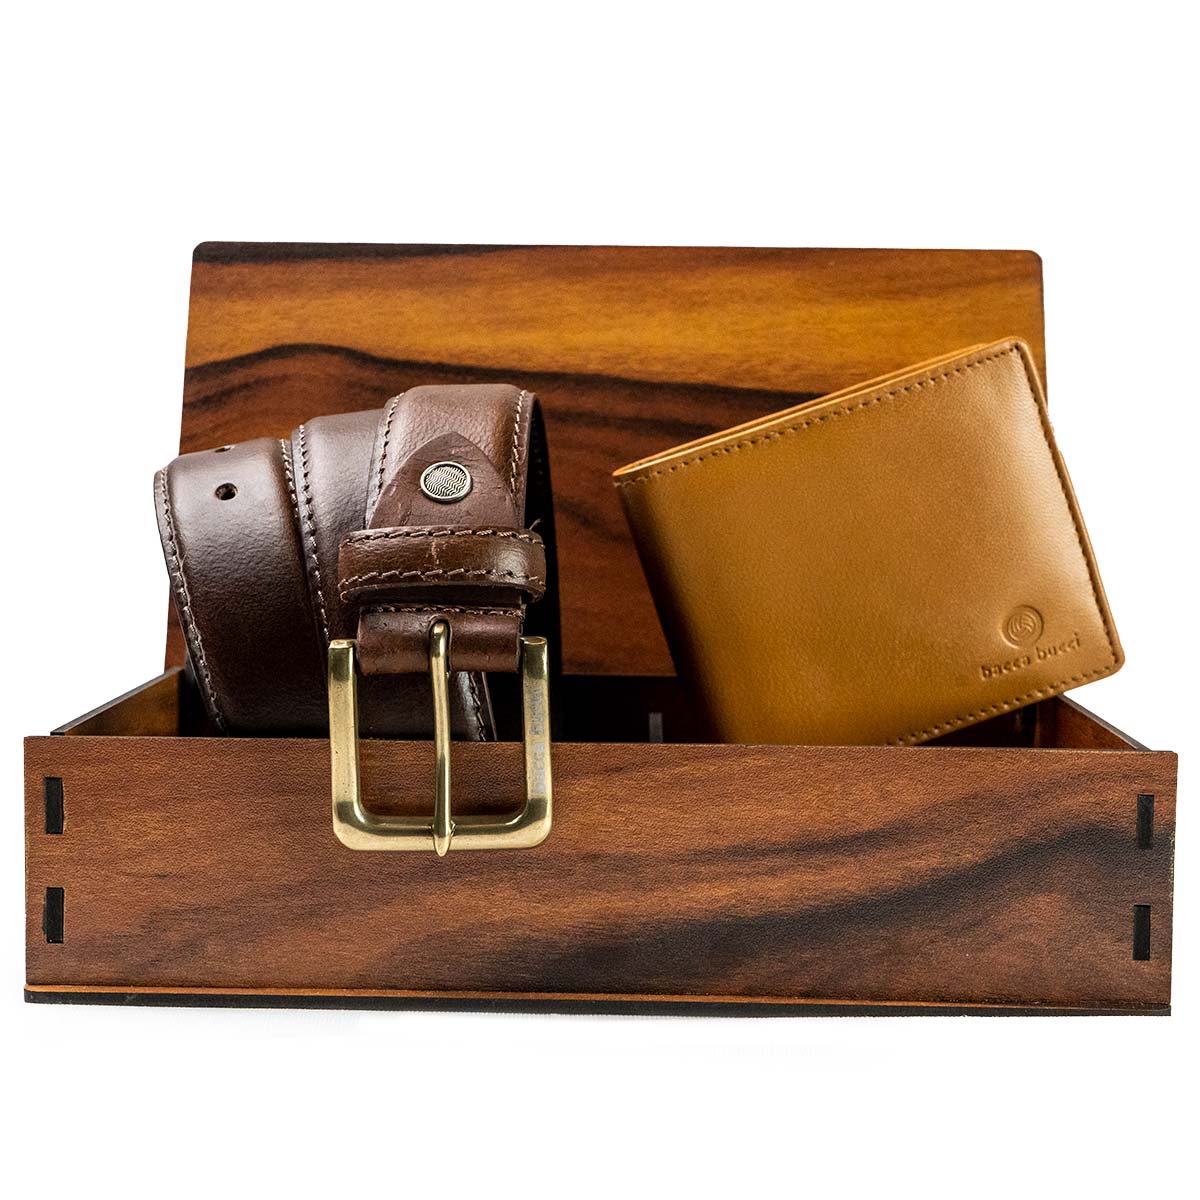 Leather belt and wallet combo for men